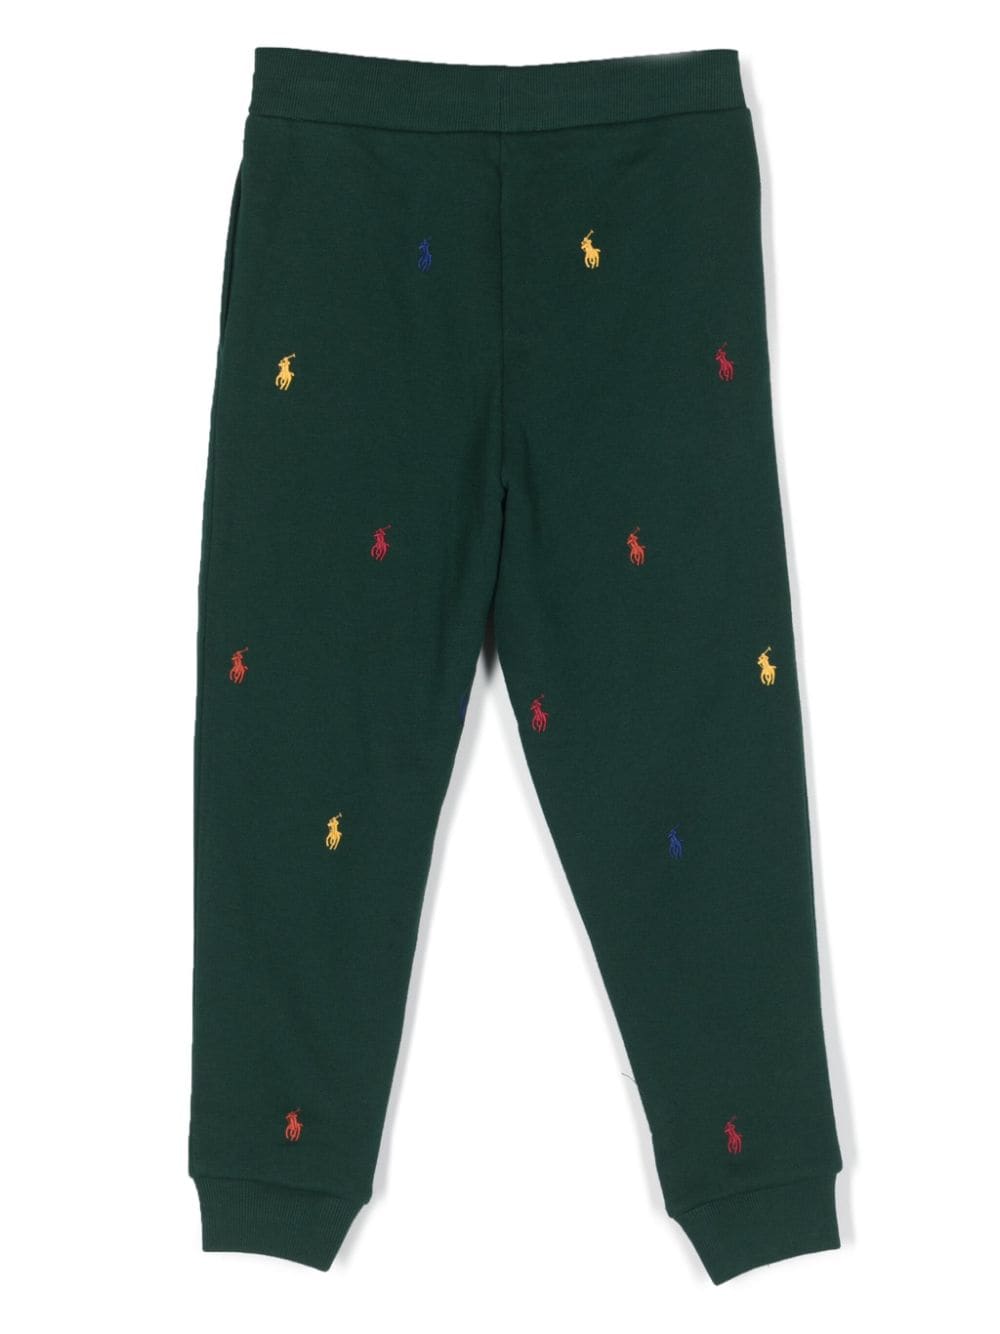 Green sports trousers for boys with logo